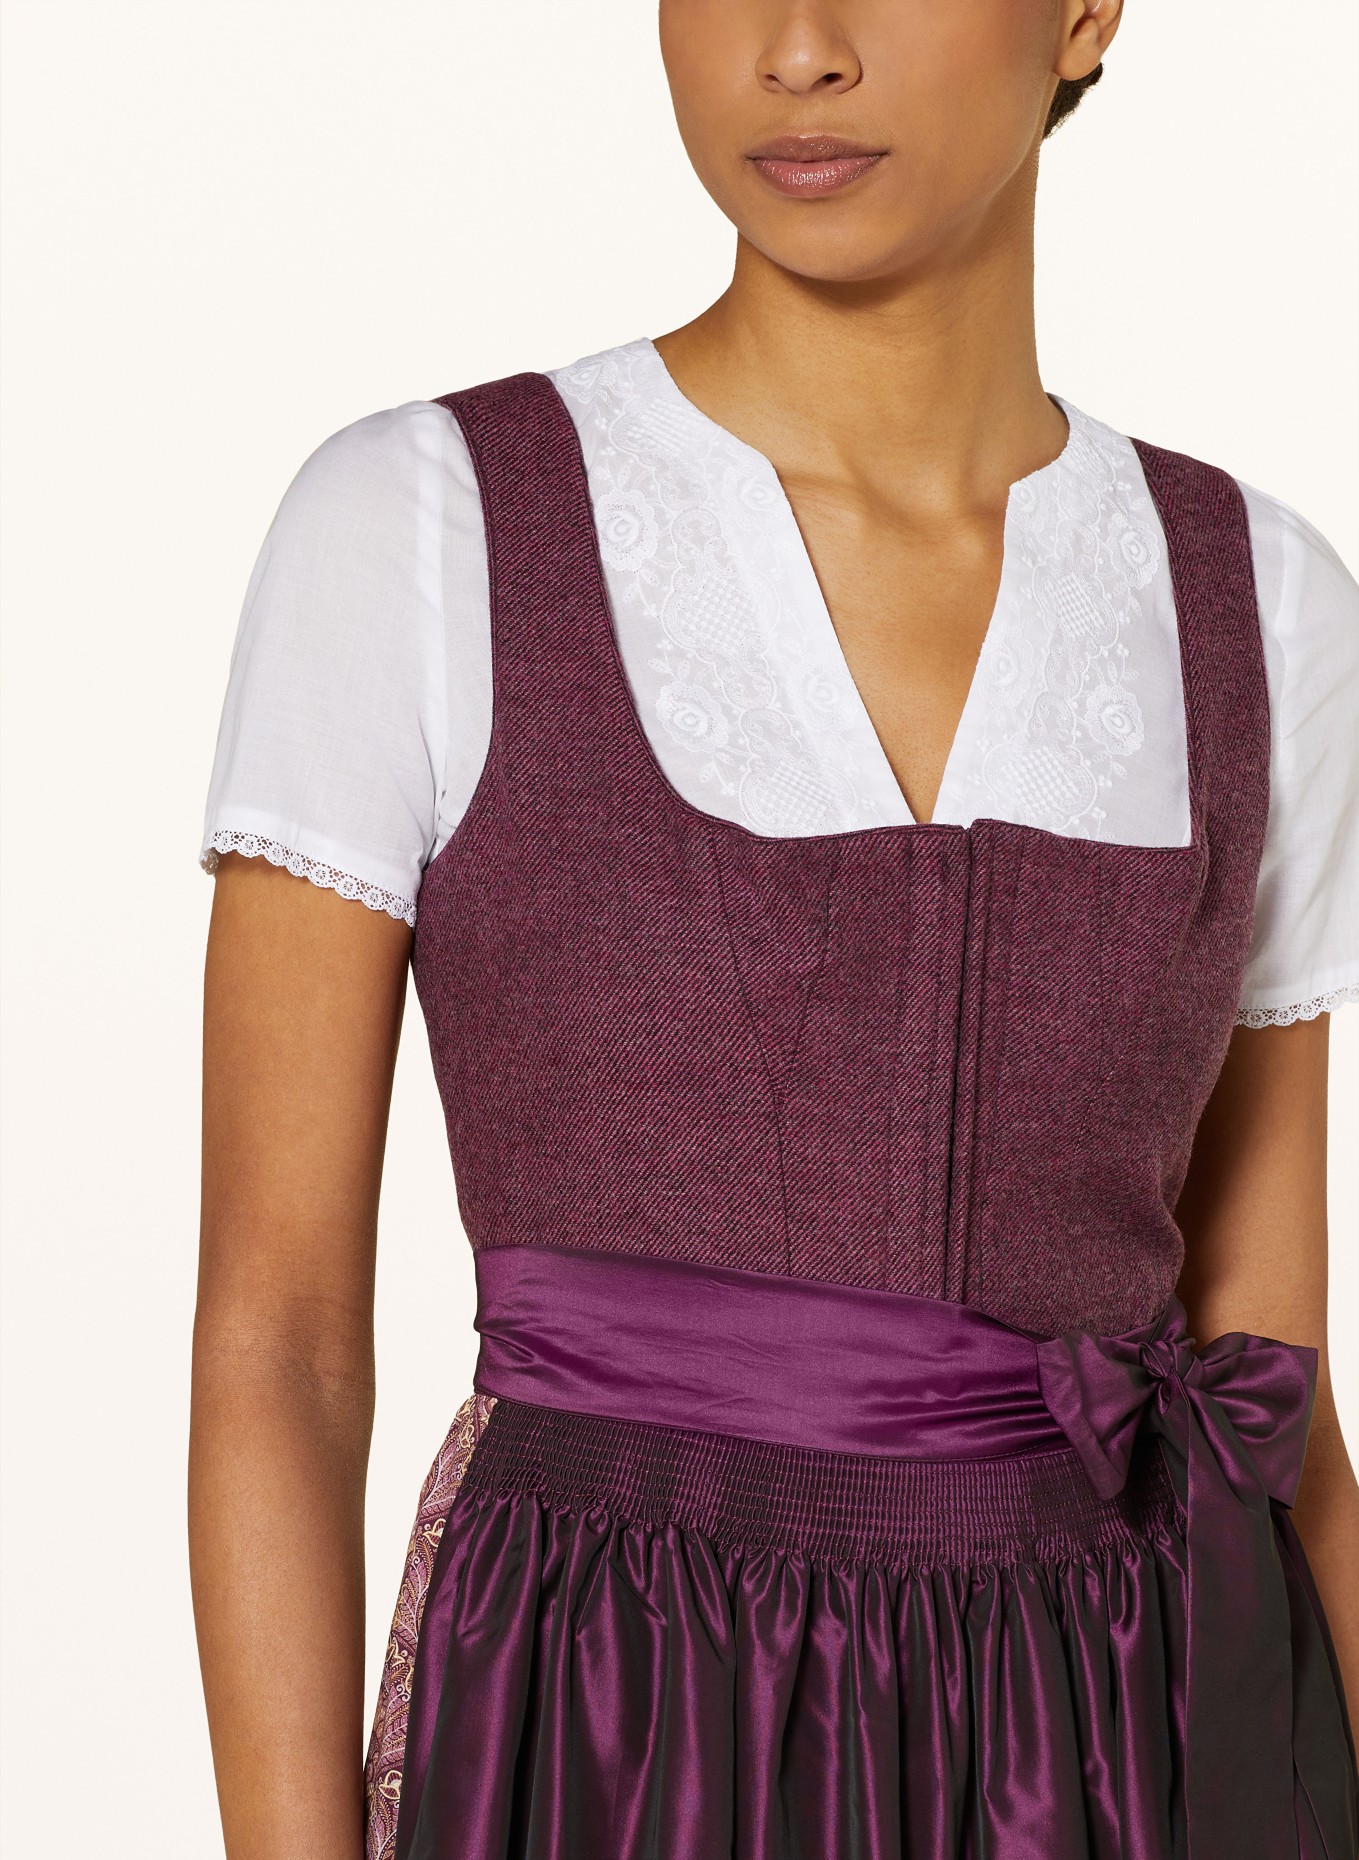 WALDORFF Dirndl blouse with crochet lace, Color: WHITE (Image 3)